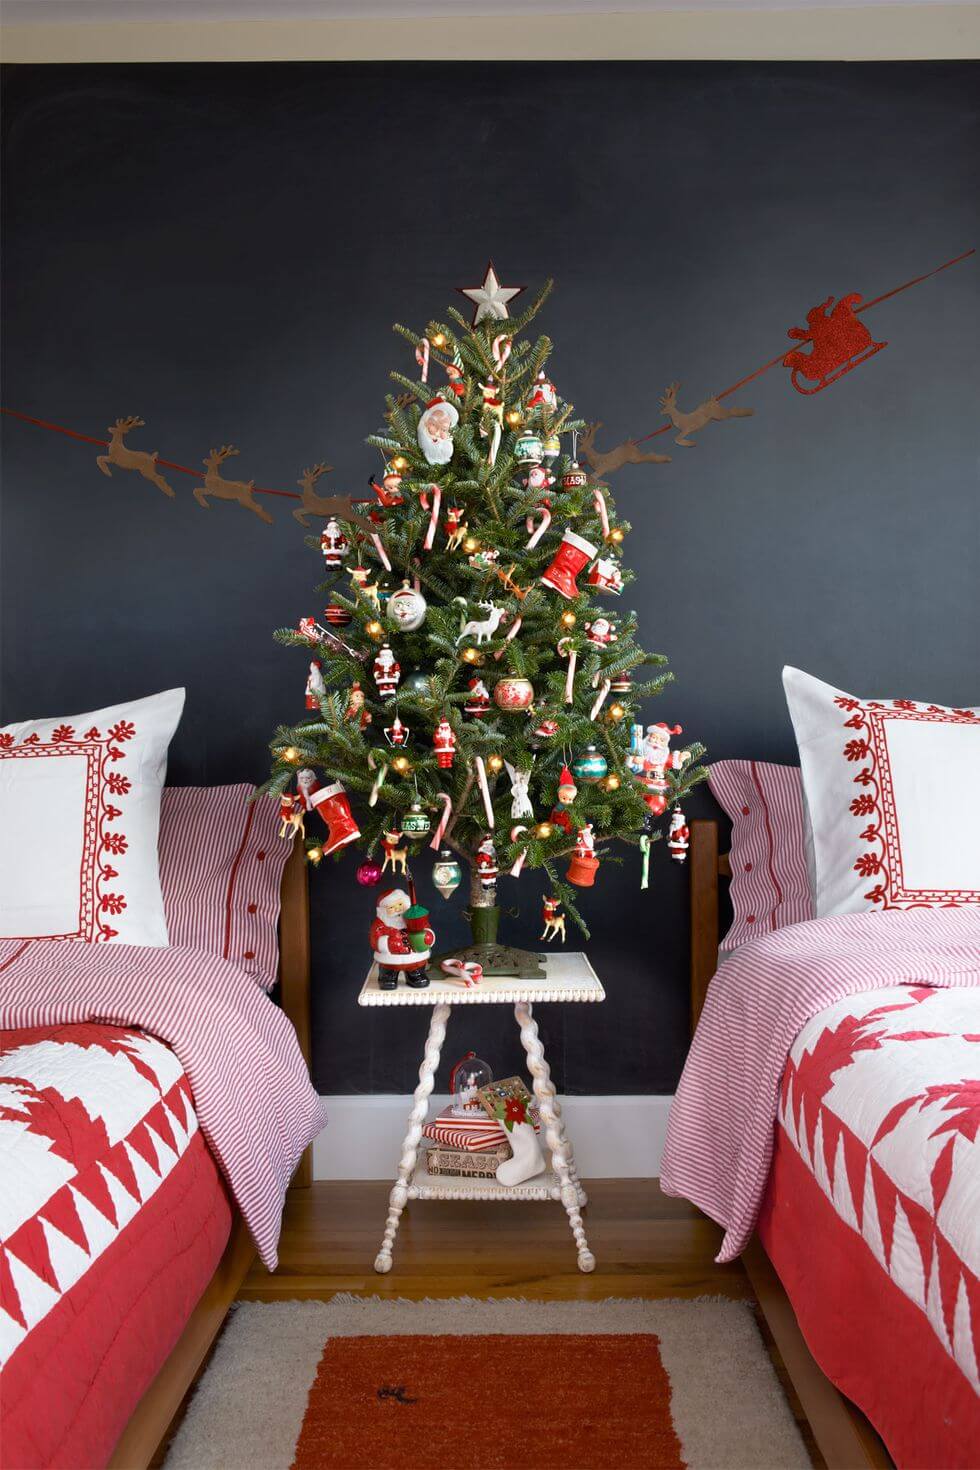 Best Way to Decorate Christmas Trees on a Budget: Inexpensive or Free & Easy Holiday Ornaments & Decorations